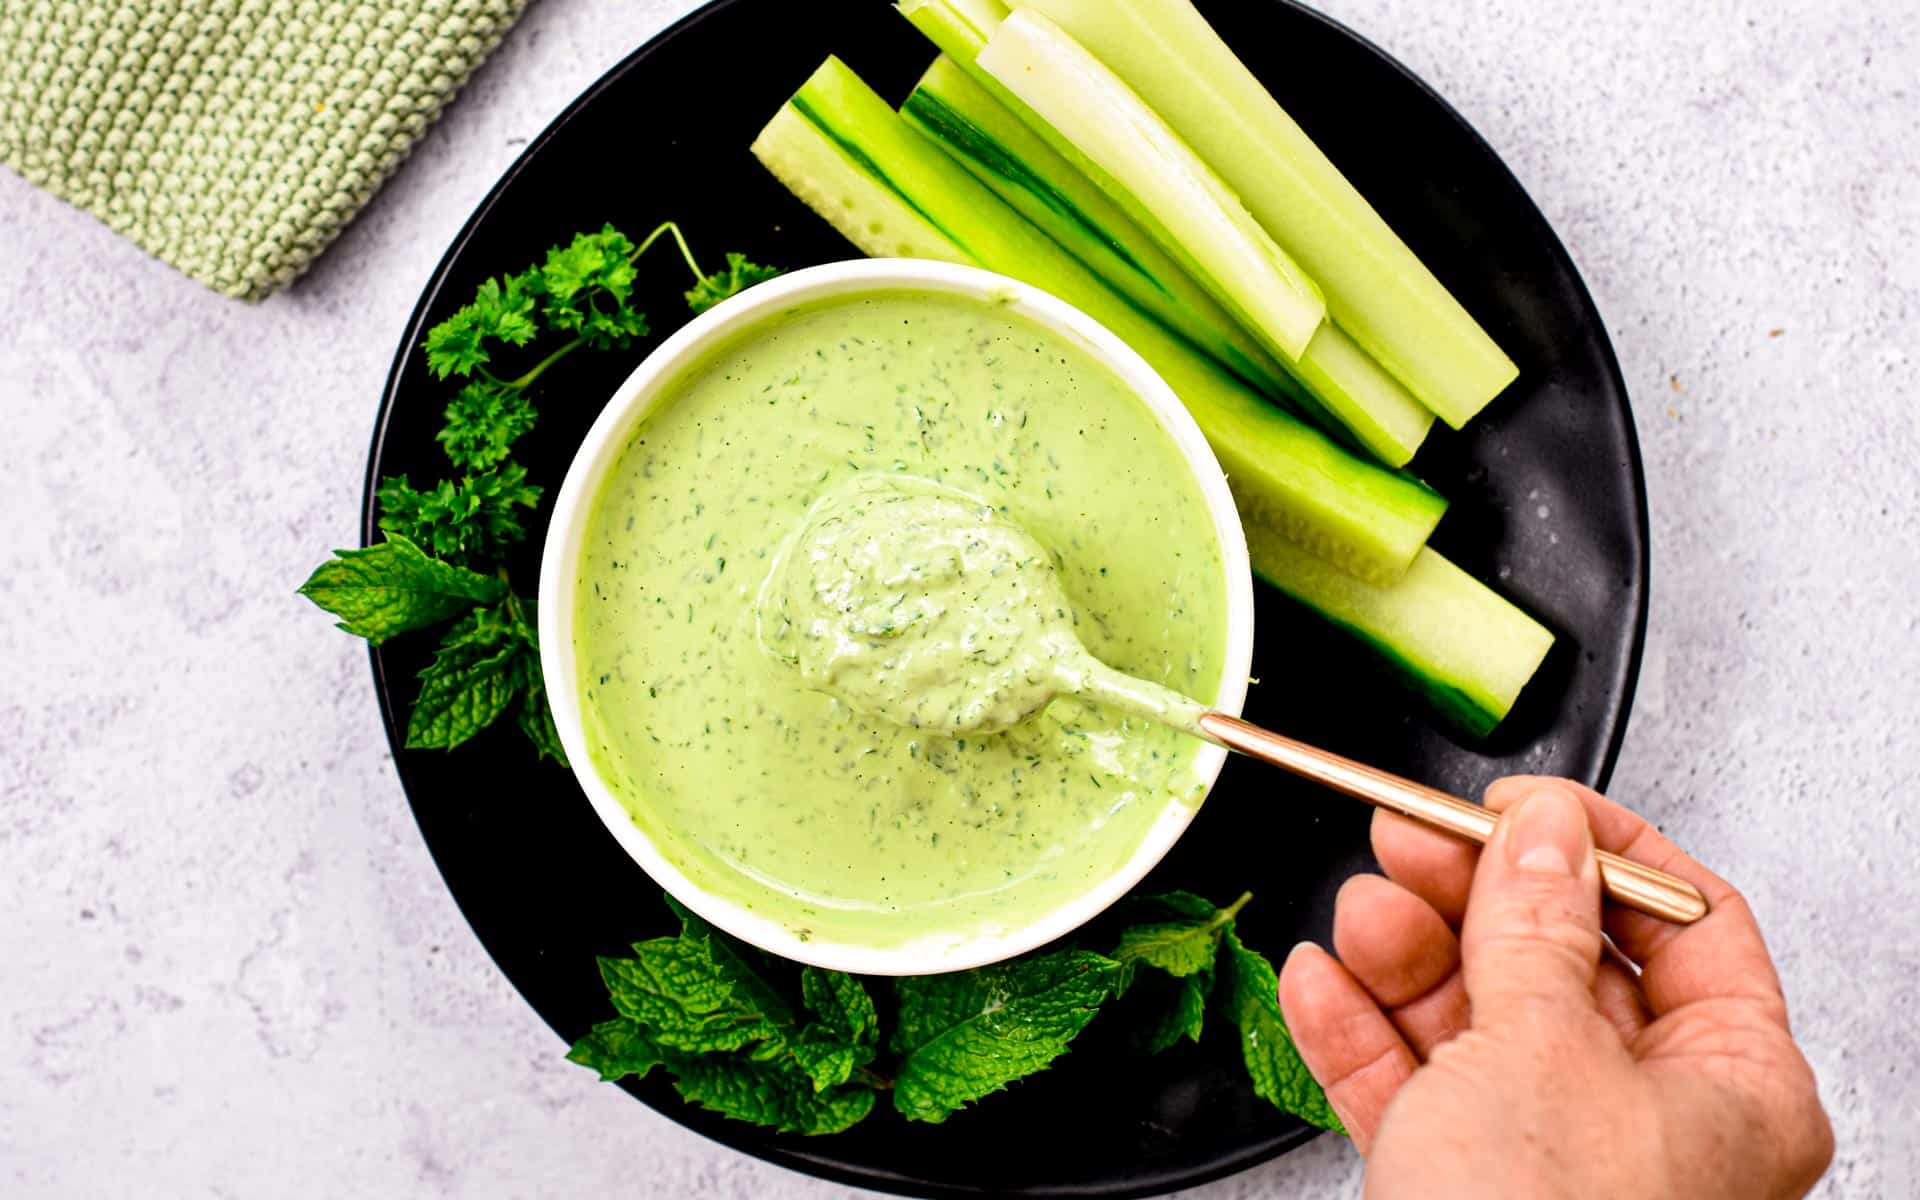 This Lemon Herb Tahini is a creamy salad dressing packed with a combination of three fresh herbs for a flavorsome dressing packed with vitamins and nutrients.